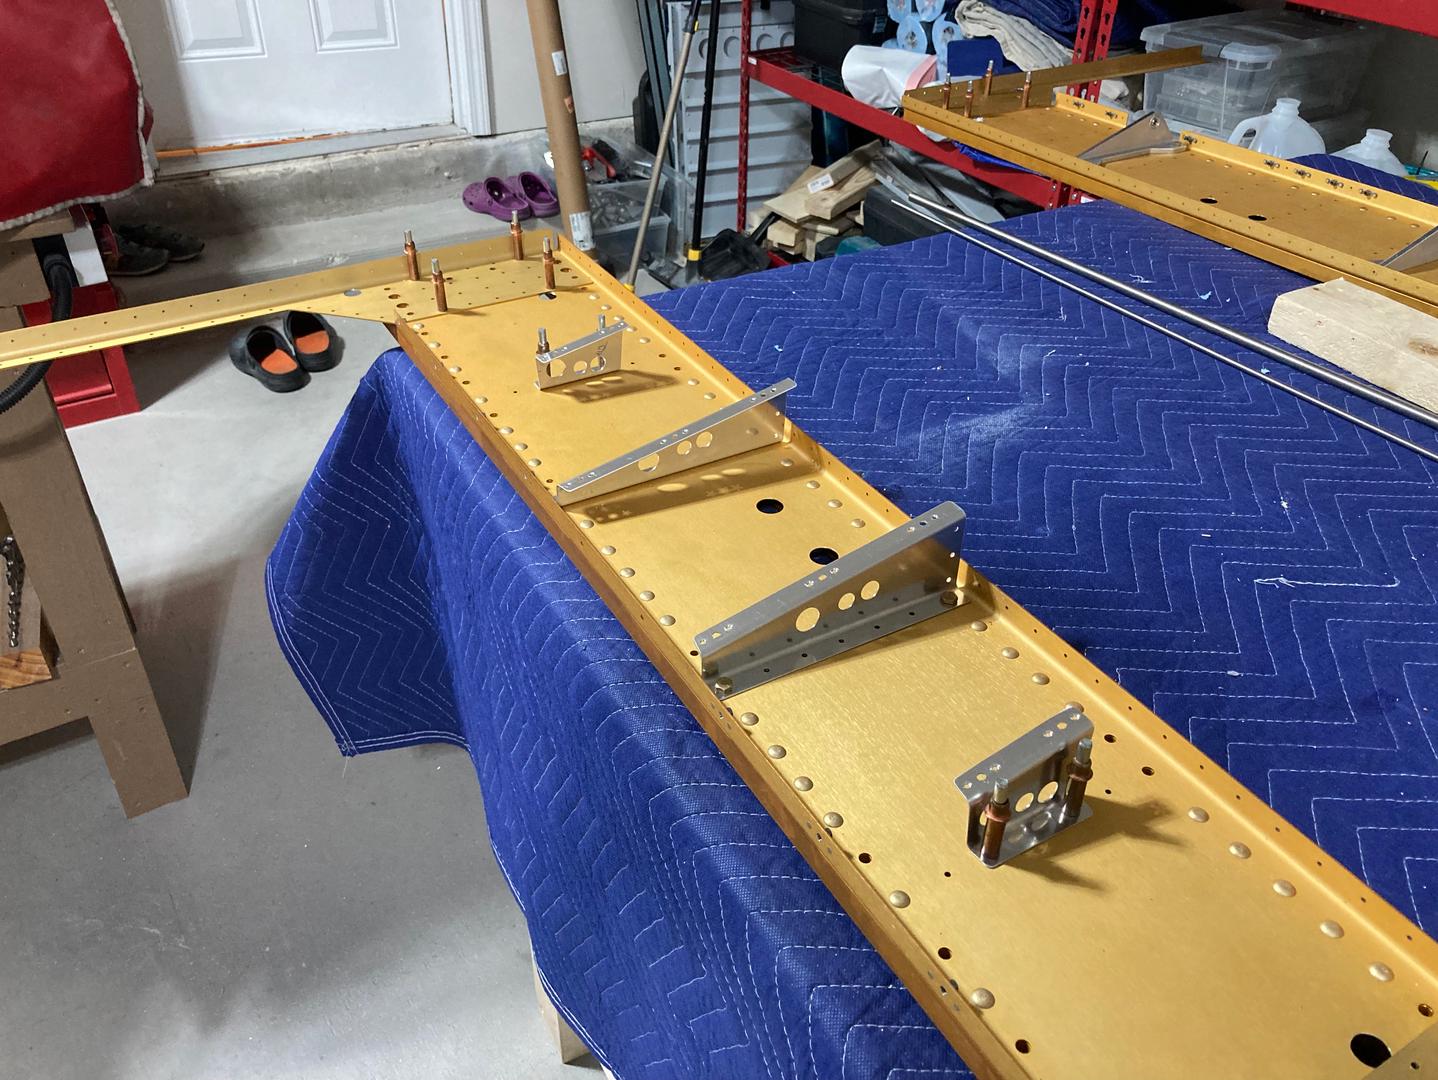 Ribs are installed, bushing holes drilled.